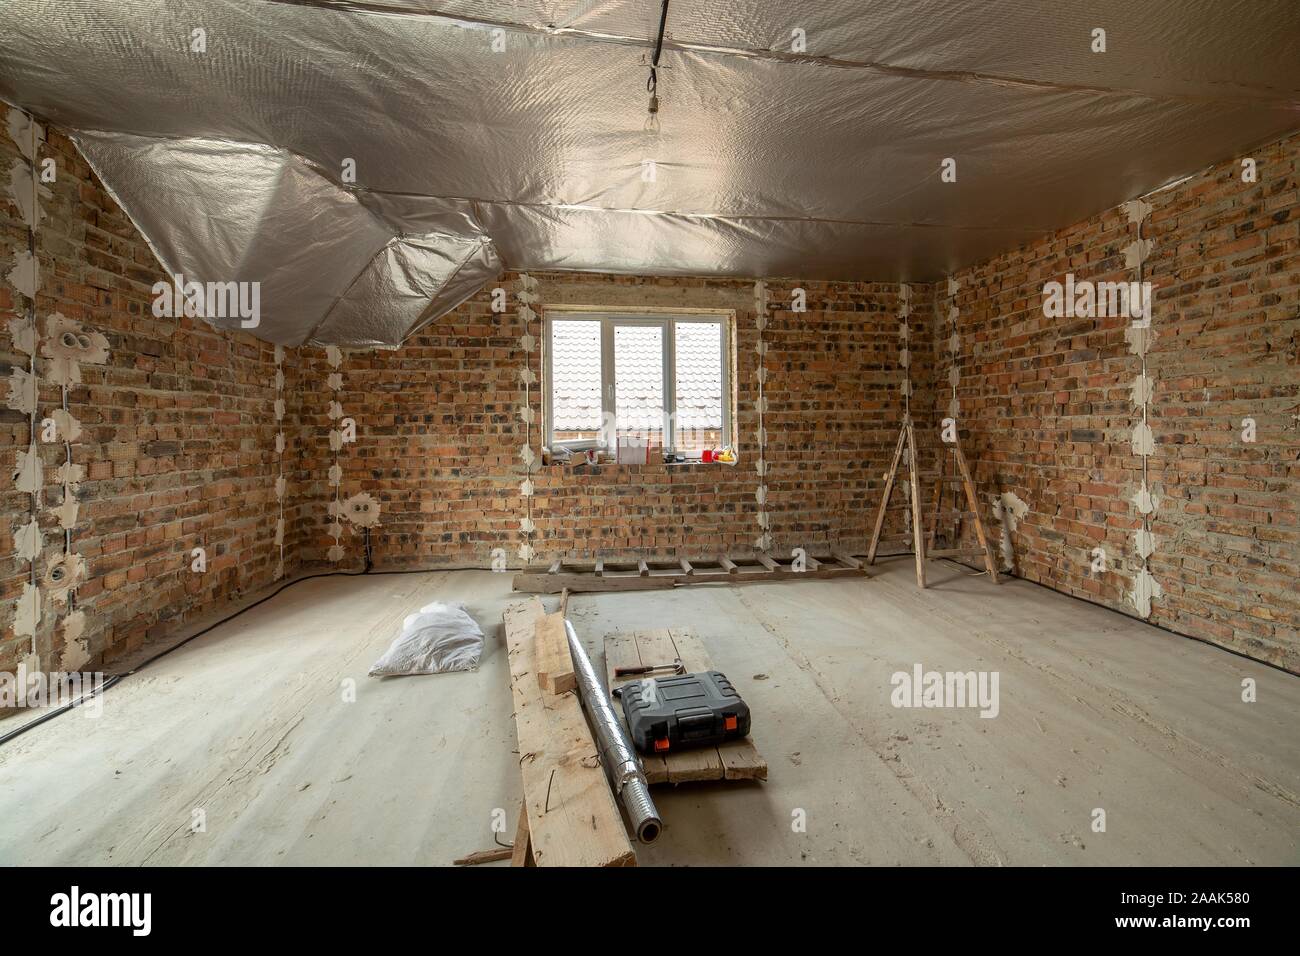 Interior Of Unfinished Brick House With Concrete Floor And